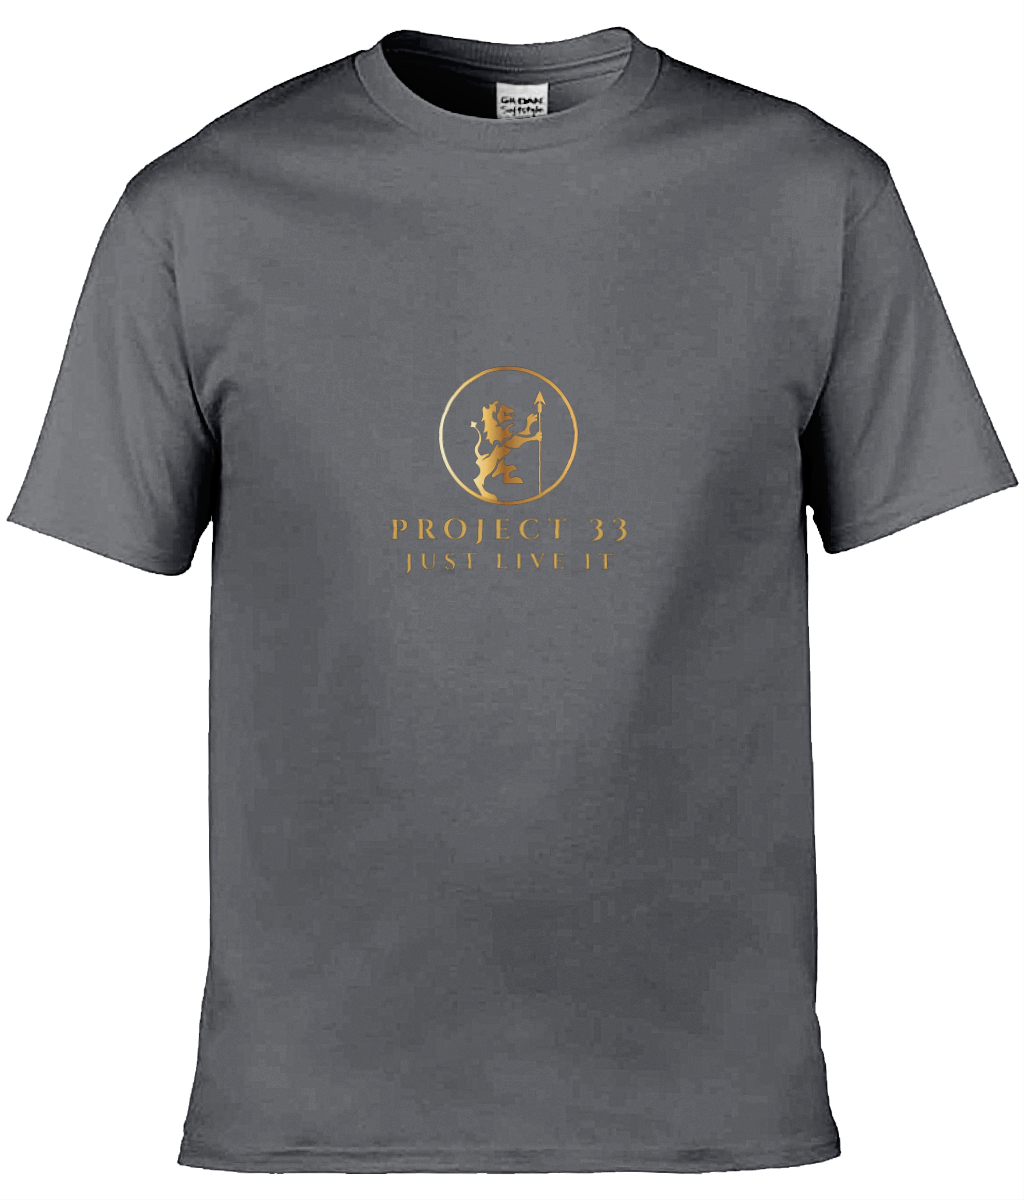 project 33 short sleeve Adult T-Shirt